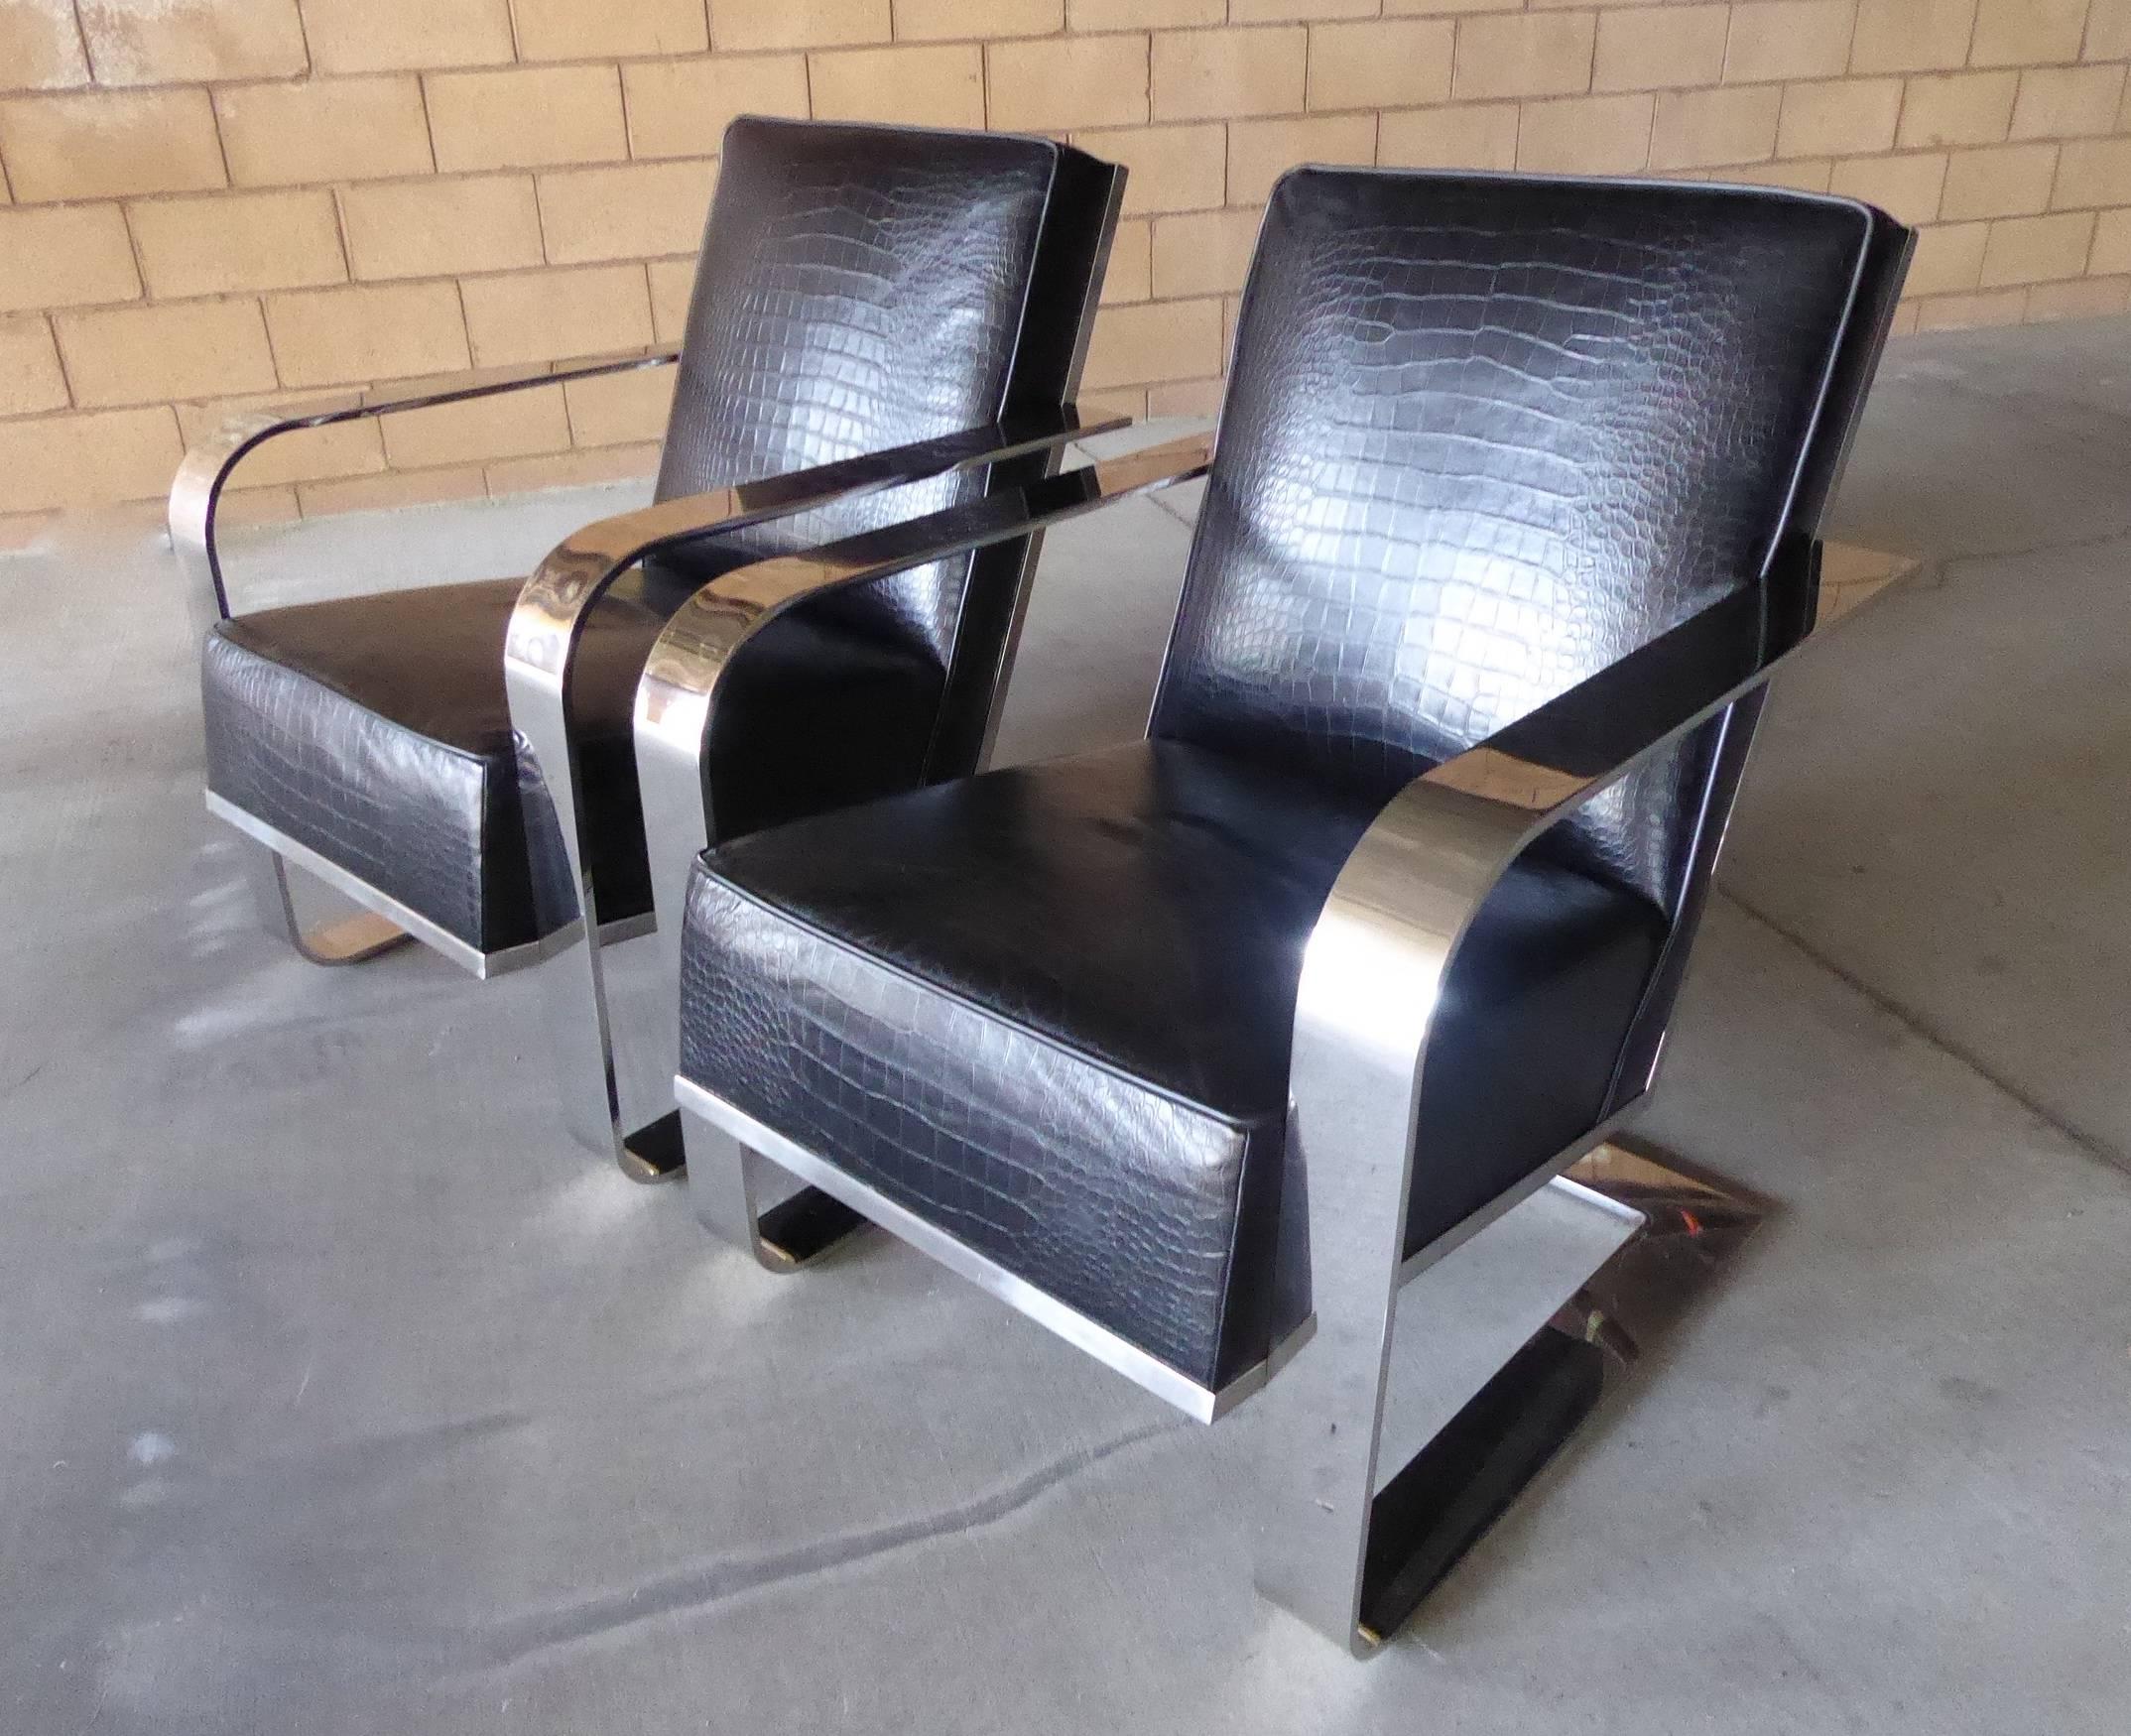 A pair of Art Deco inspired lounge chairs made by Ralph Lauren Home. The chair frames are made of solid nickel-plated steel and are upholstered in an embossed crocodile patterned black leather. The chairs are substantial in size and weight and offer